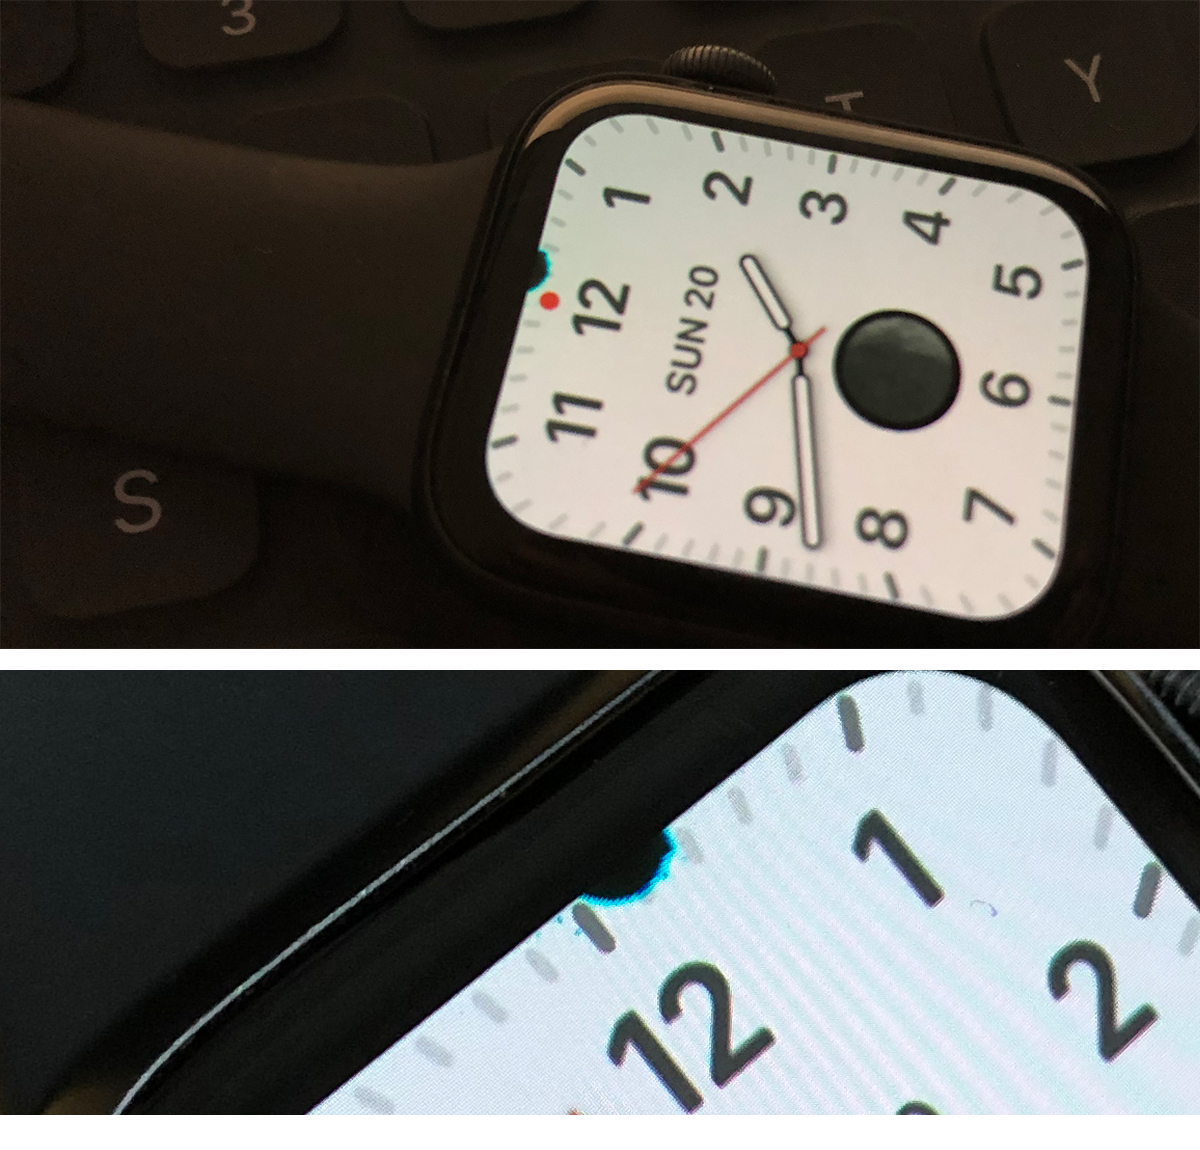 The black spot (Black Spot Display) on the screen Apple Watch [How To Fix]